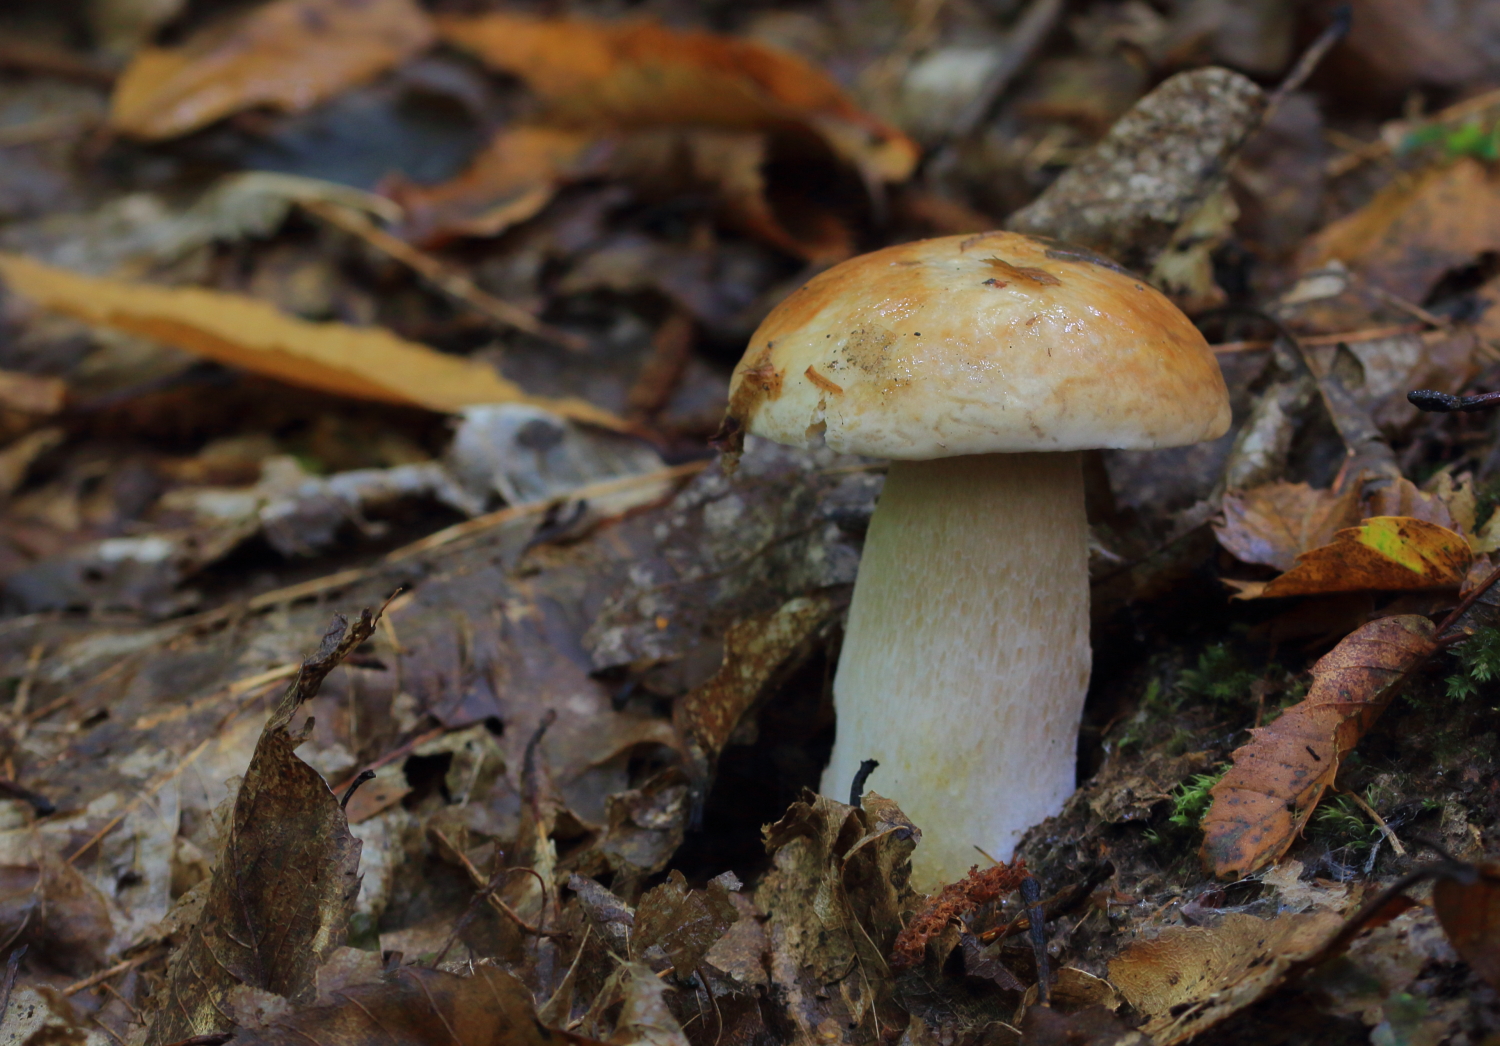 The thick meaty stem and cap of ectomycorrhizal boletes like the Penny Bun (Boletus edulis) might perform a number of functions